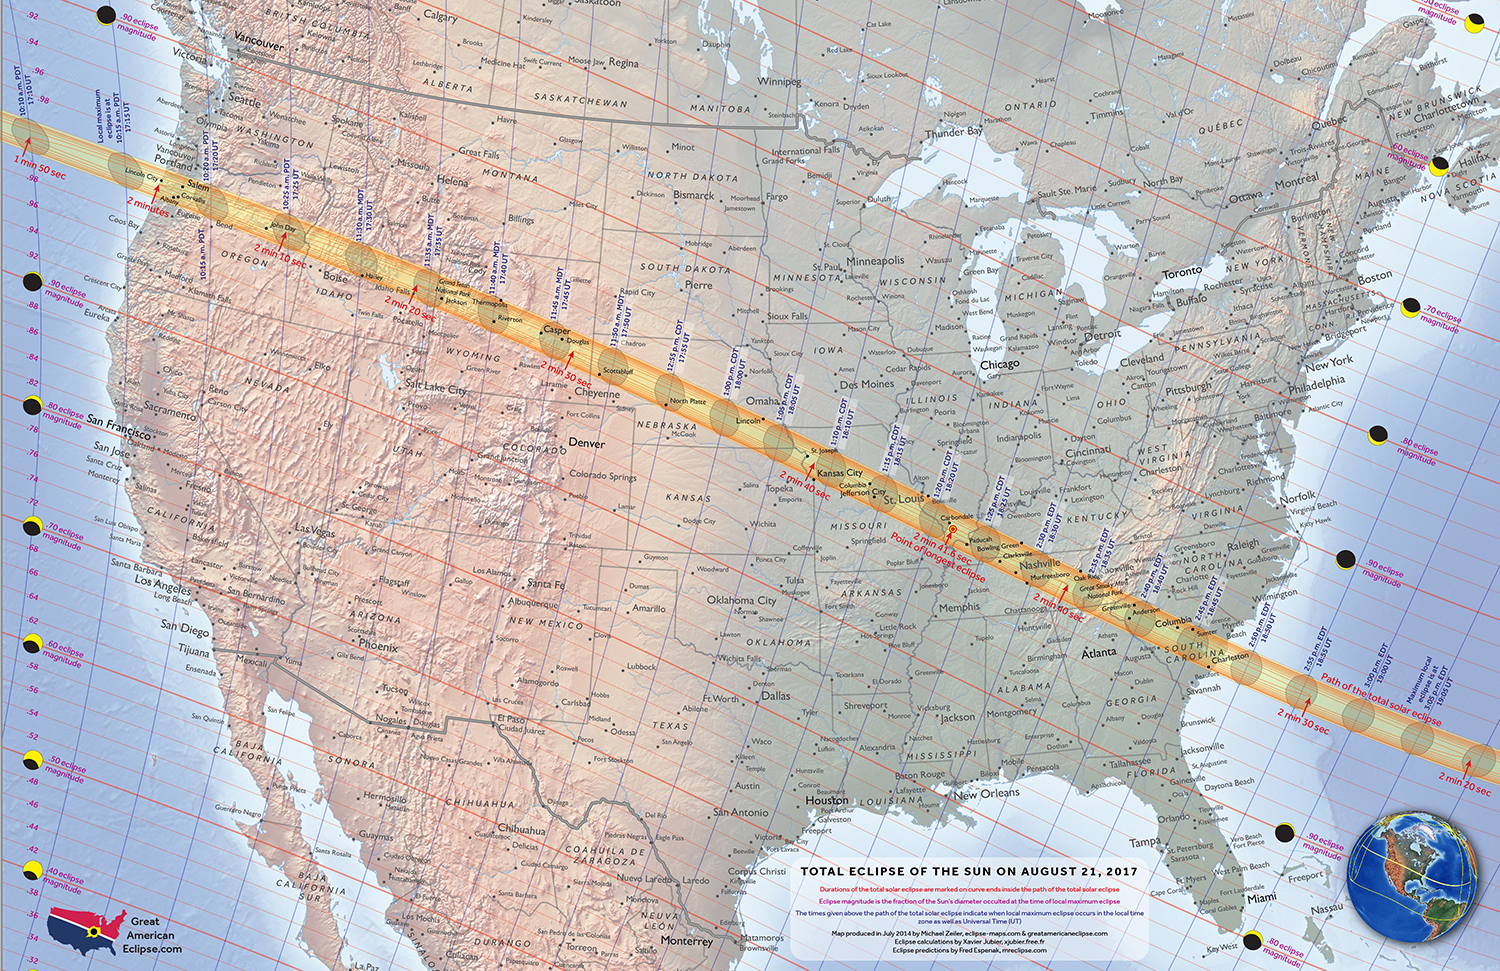 eclipse 2017, path of totality, great american eclipse